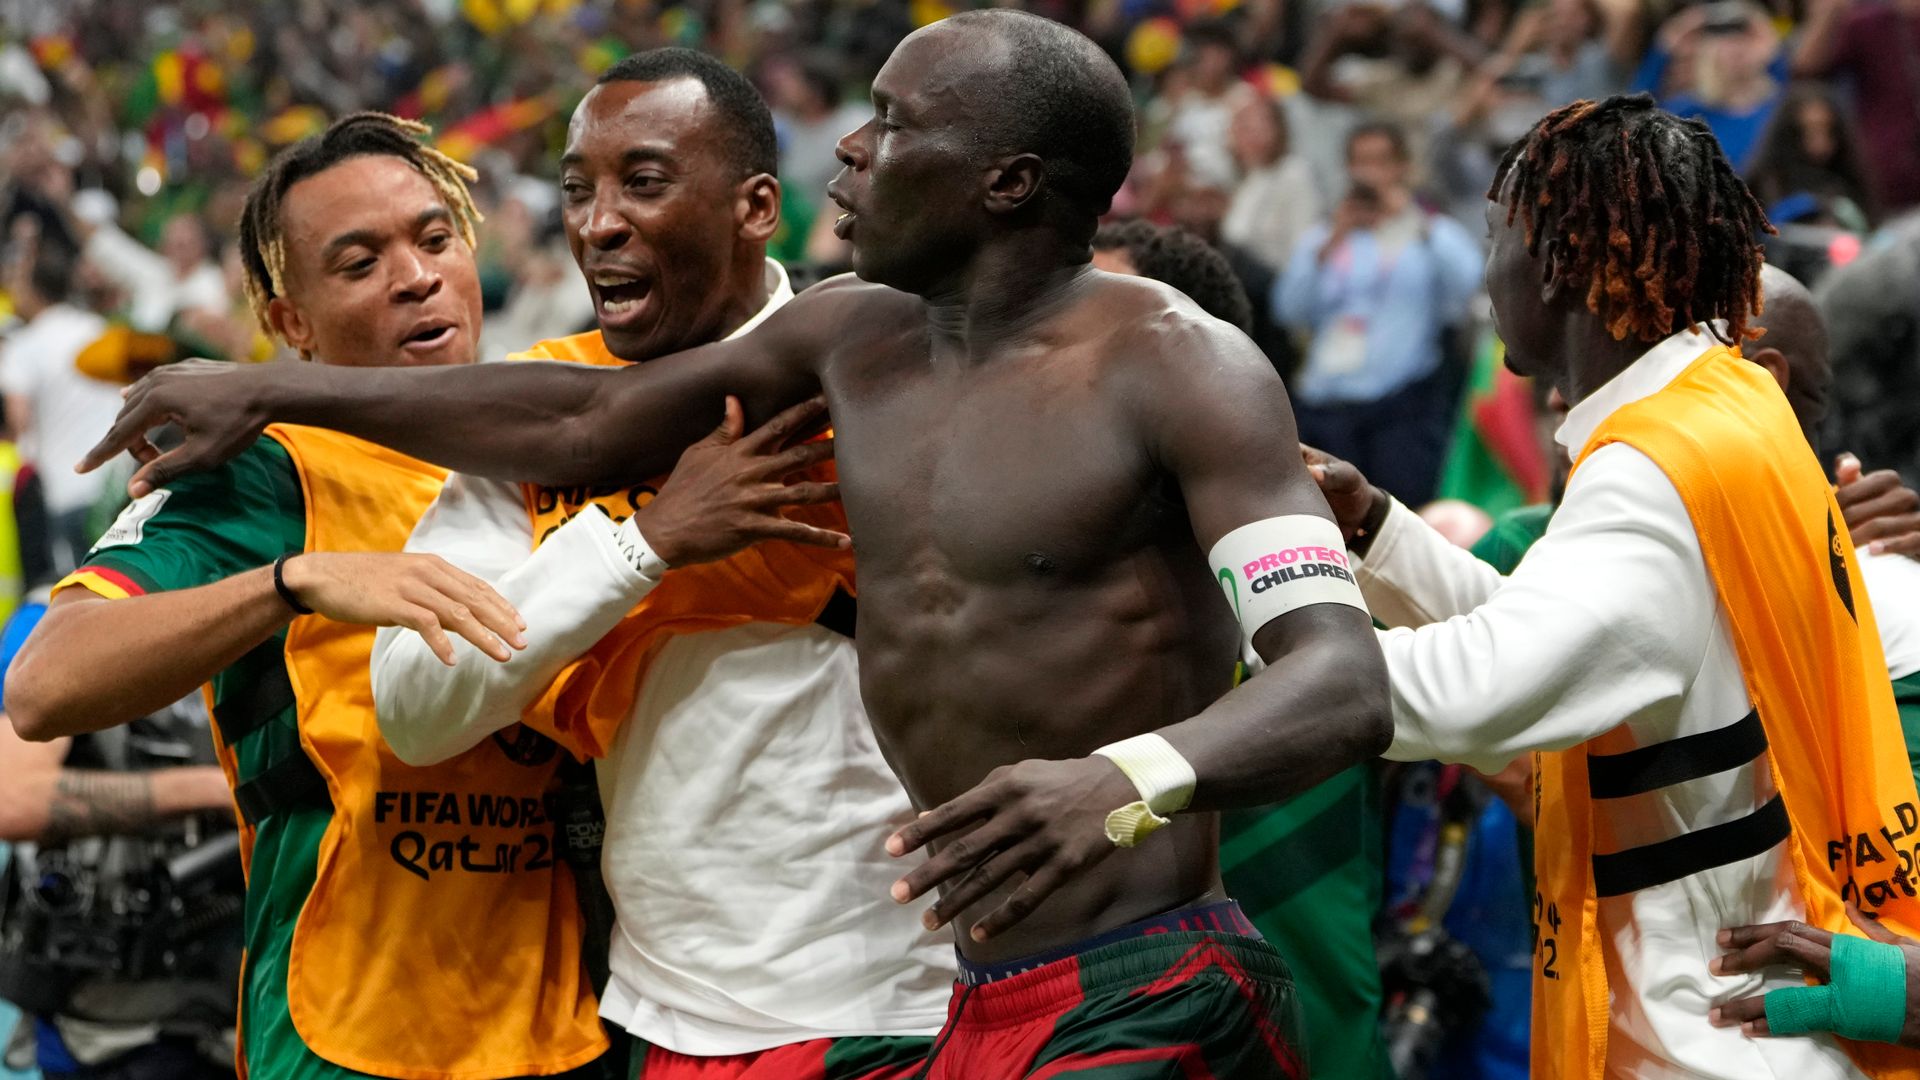 World Cup 2022 – Cameroon 1-0 Brazil: Vincent Aboubakar’s late winner not enough to earn last-16 place